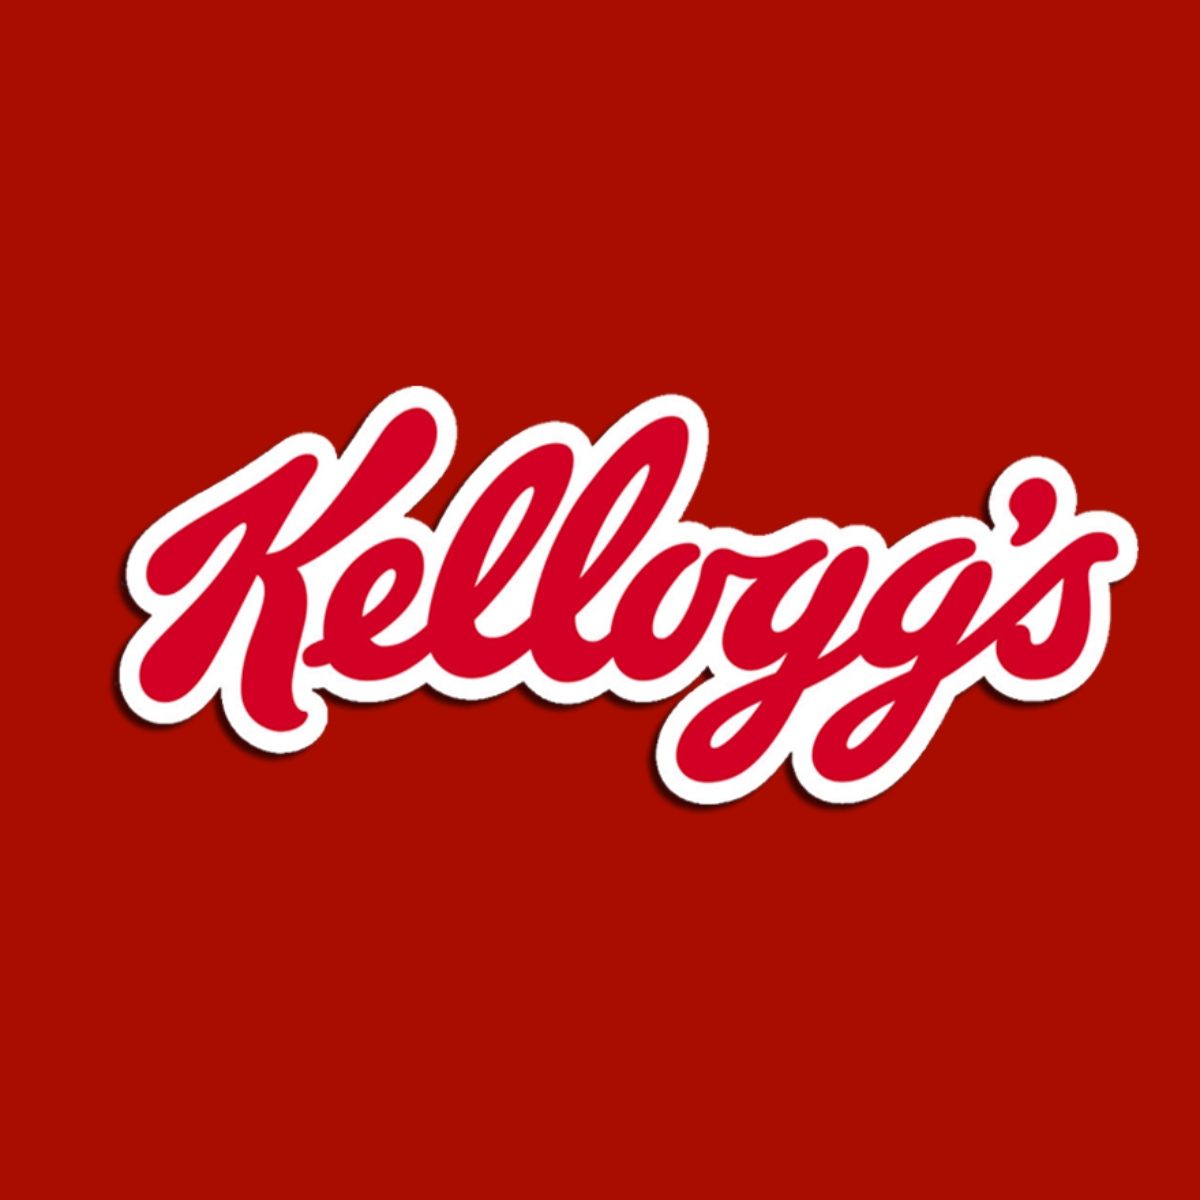 <p class=""><strong><a class="SWhtmlLink" href="https://www.kelloggs.com/en_US/home.html%20" rel="noopener">Kellogg's</a>, Battle Creek</strong></p> <p>The Kellogg brothers accidentally started their company when they created Corn Flakes, an easily digestible and nutritious breakfast cereal. The cereal was a hit, and it wasn't long until the company had cornered the ready-to-eat breakfast market.</p>